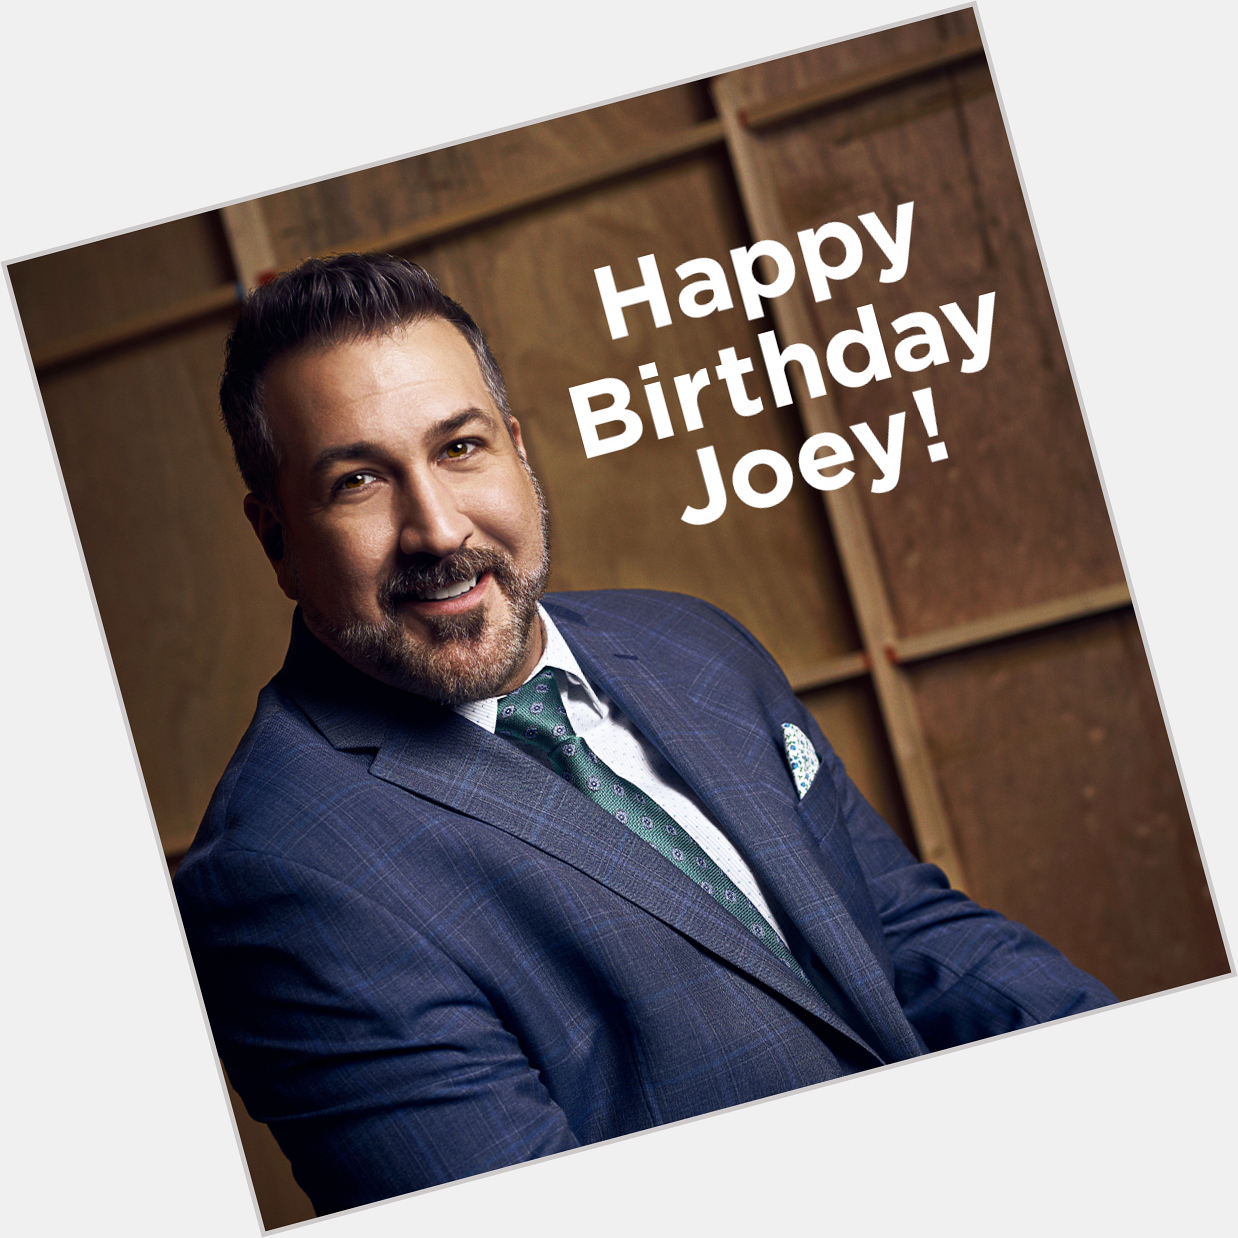 Happy Birthday, Joey Fatone! Sing, dance, host...you can do it all. Send Joey some birthday wishes! 